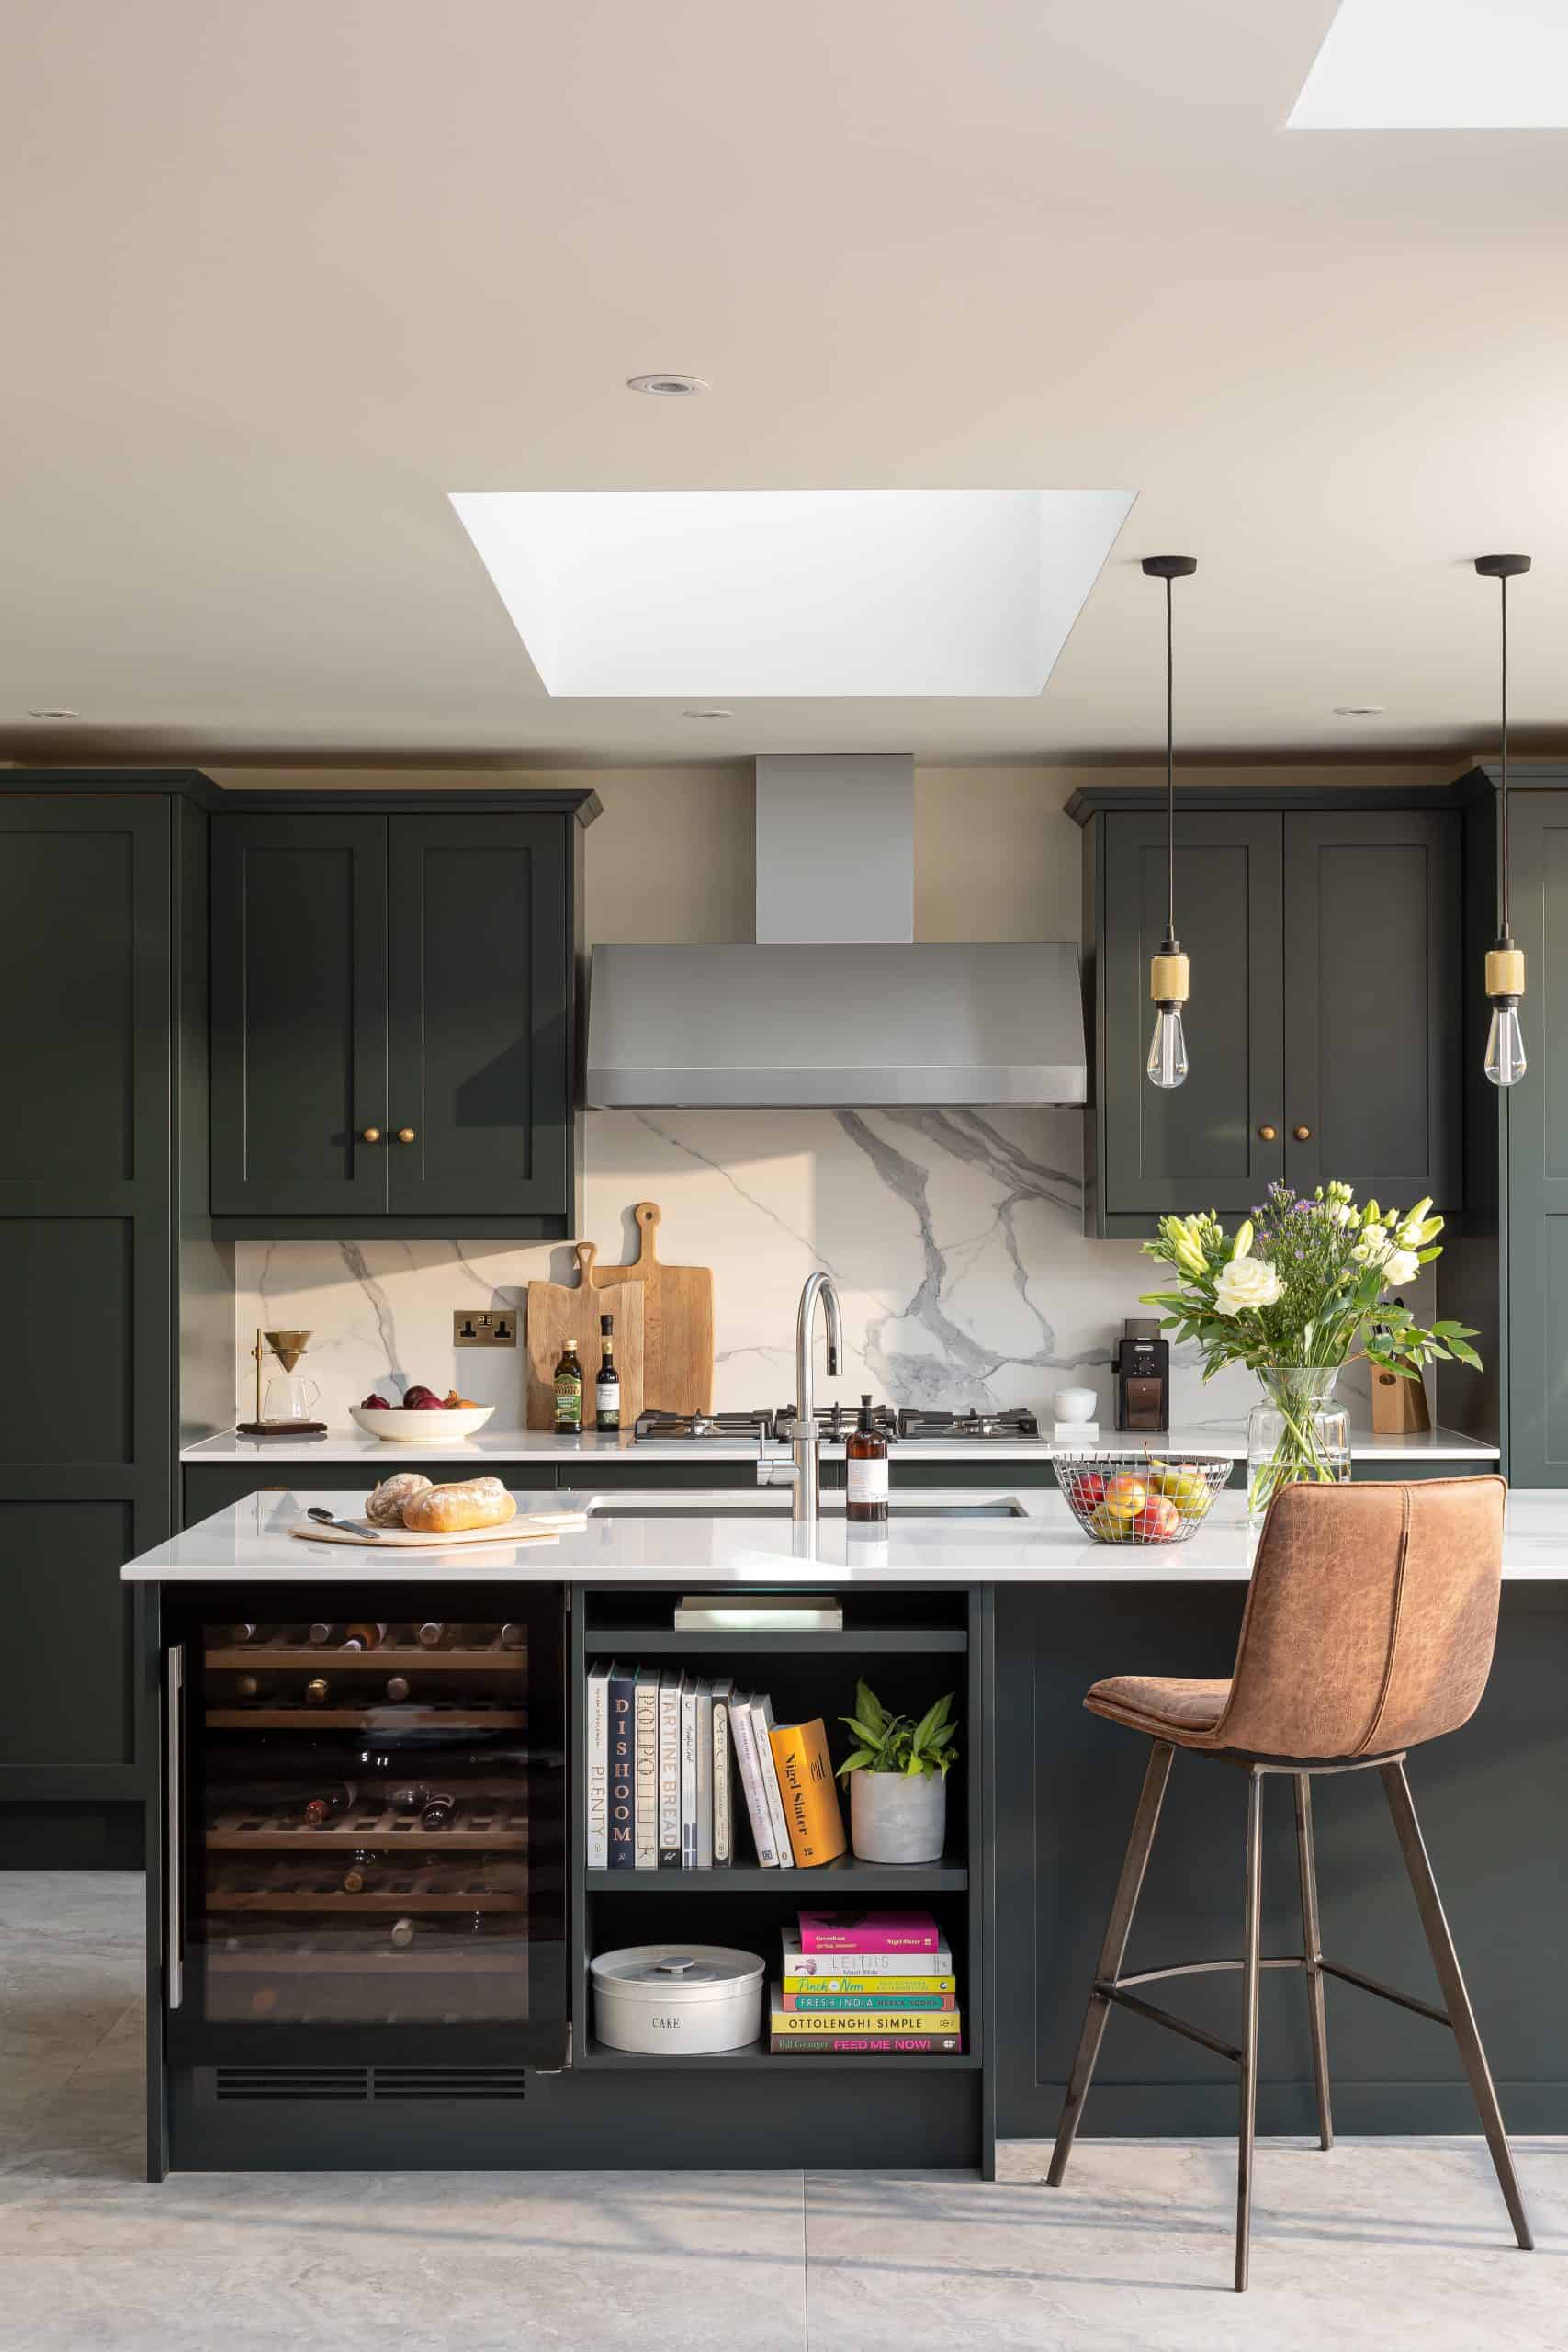 John Lewis of Hungerford luxury kitchen with kitchen island and stone flooring with a marble splashback in dark green cabinetry